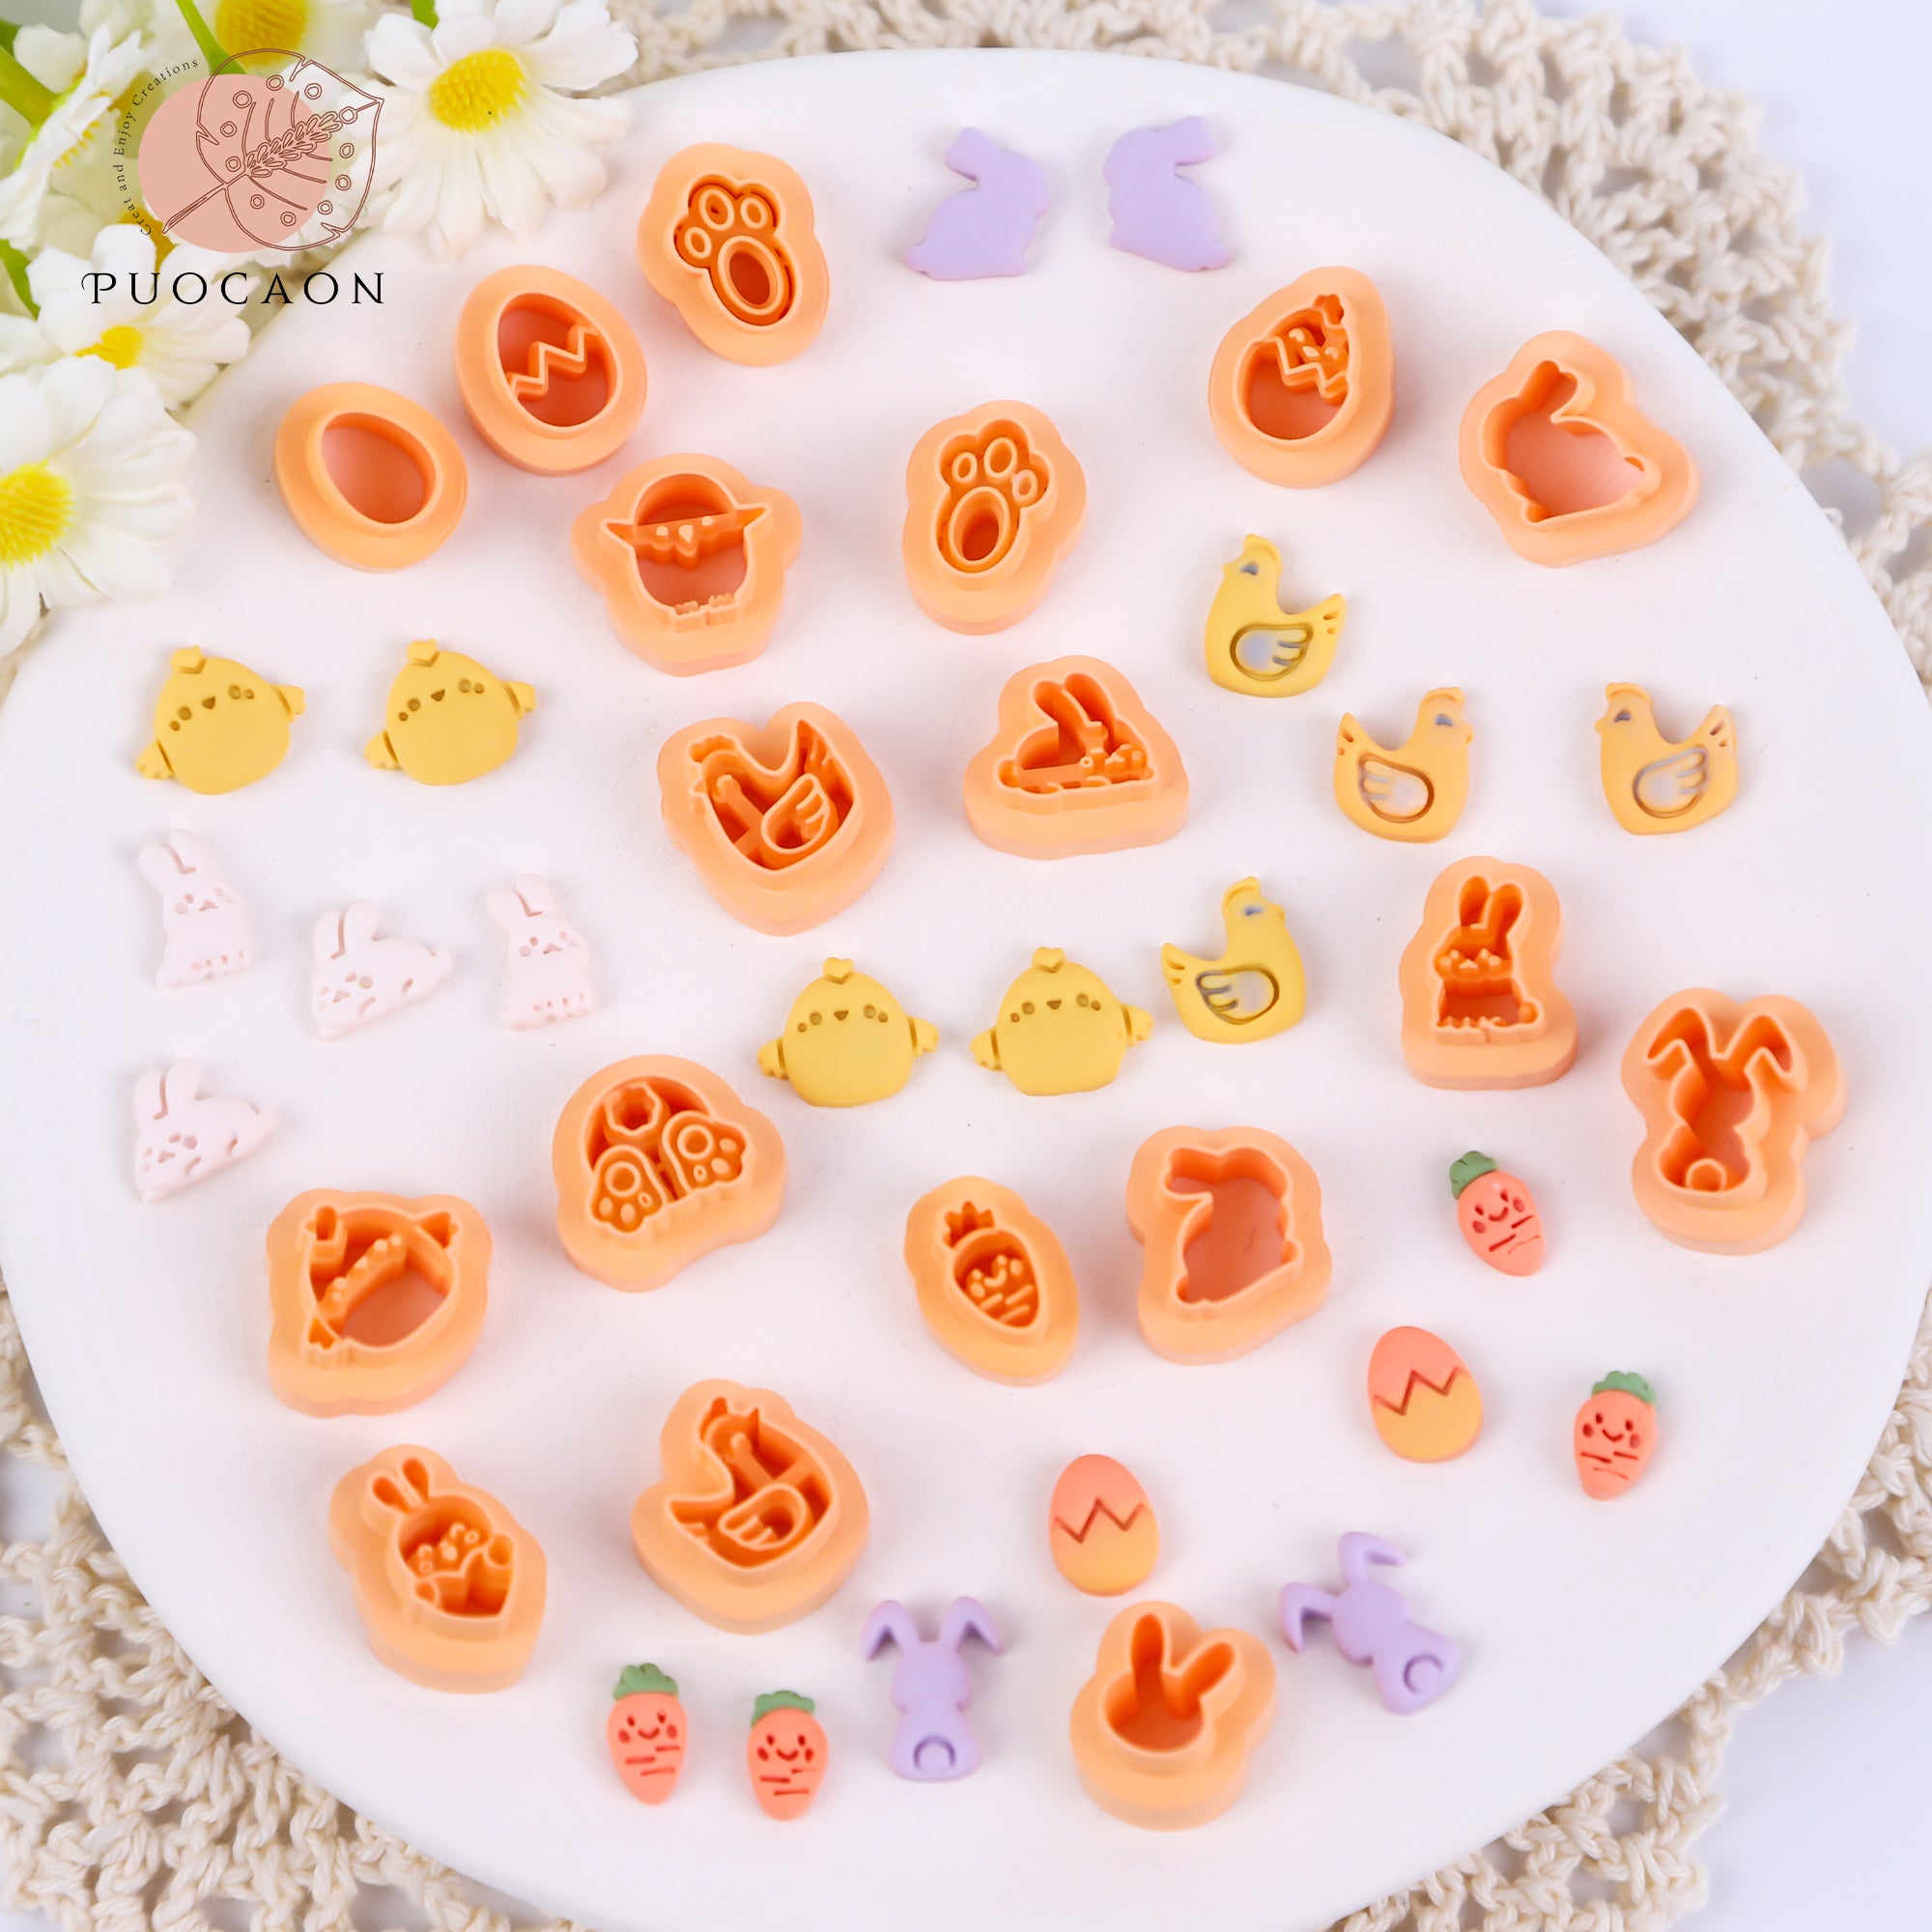 Puocaon Easter Polymer Clay Cutters - 18 Pcs Stud Clay Earring Cutters, Baby Rabbit Chicken Eggs Clay Cutters for Polymer Clay Earrings, 3D Print Mini Clay Cutters for Earrings Making